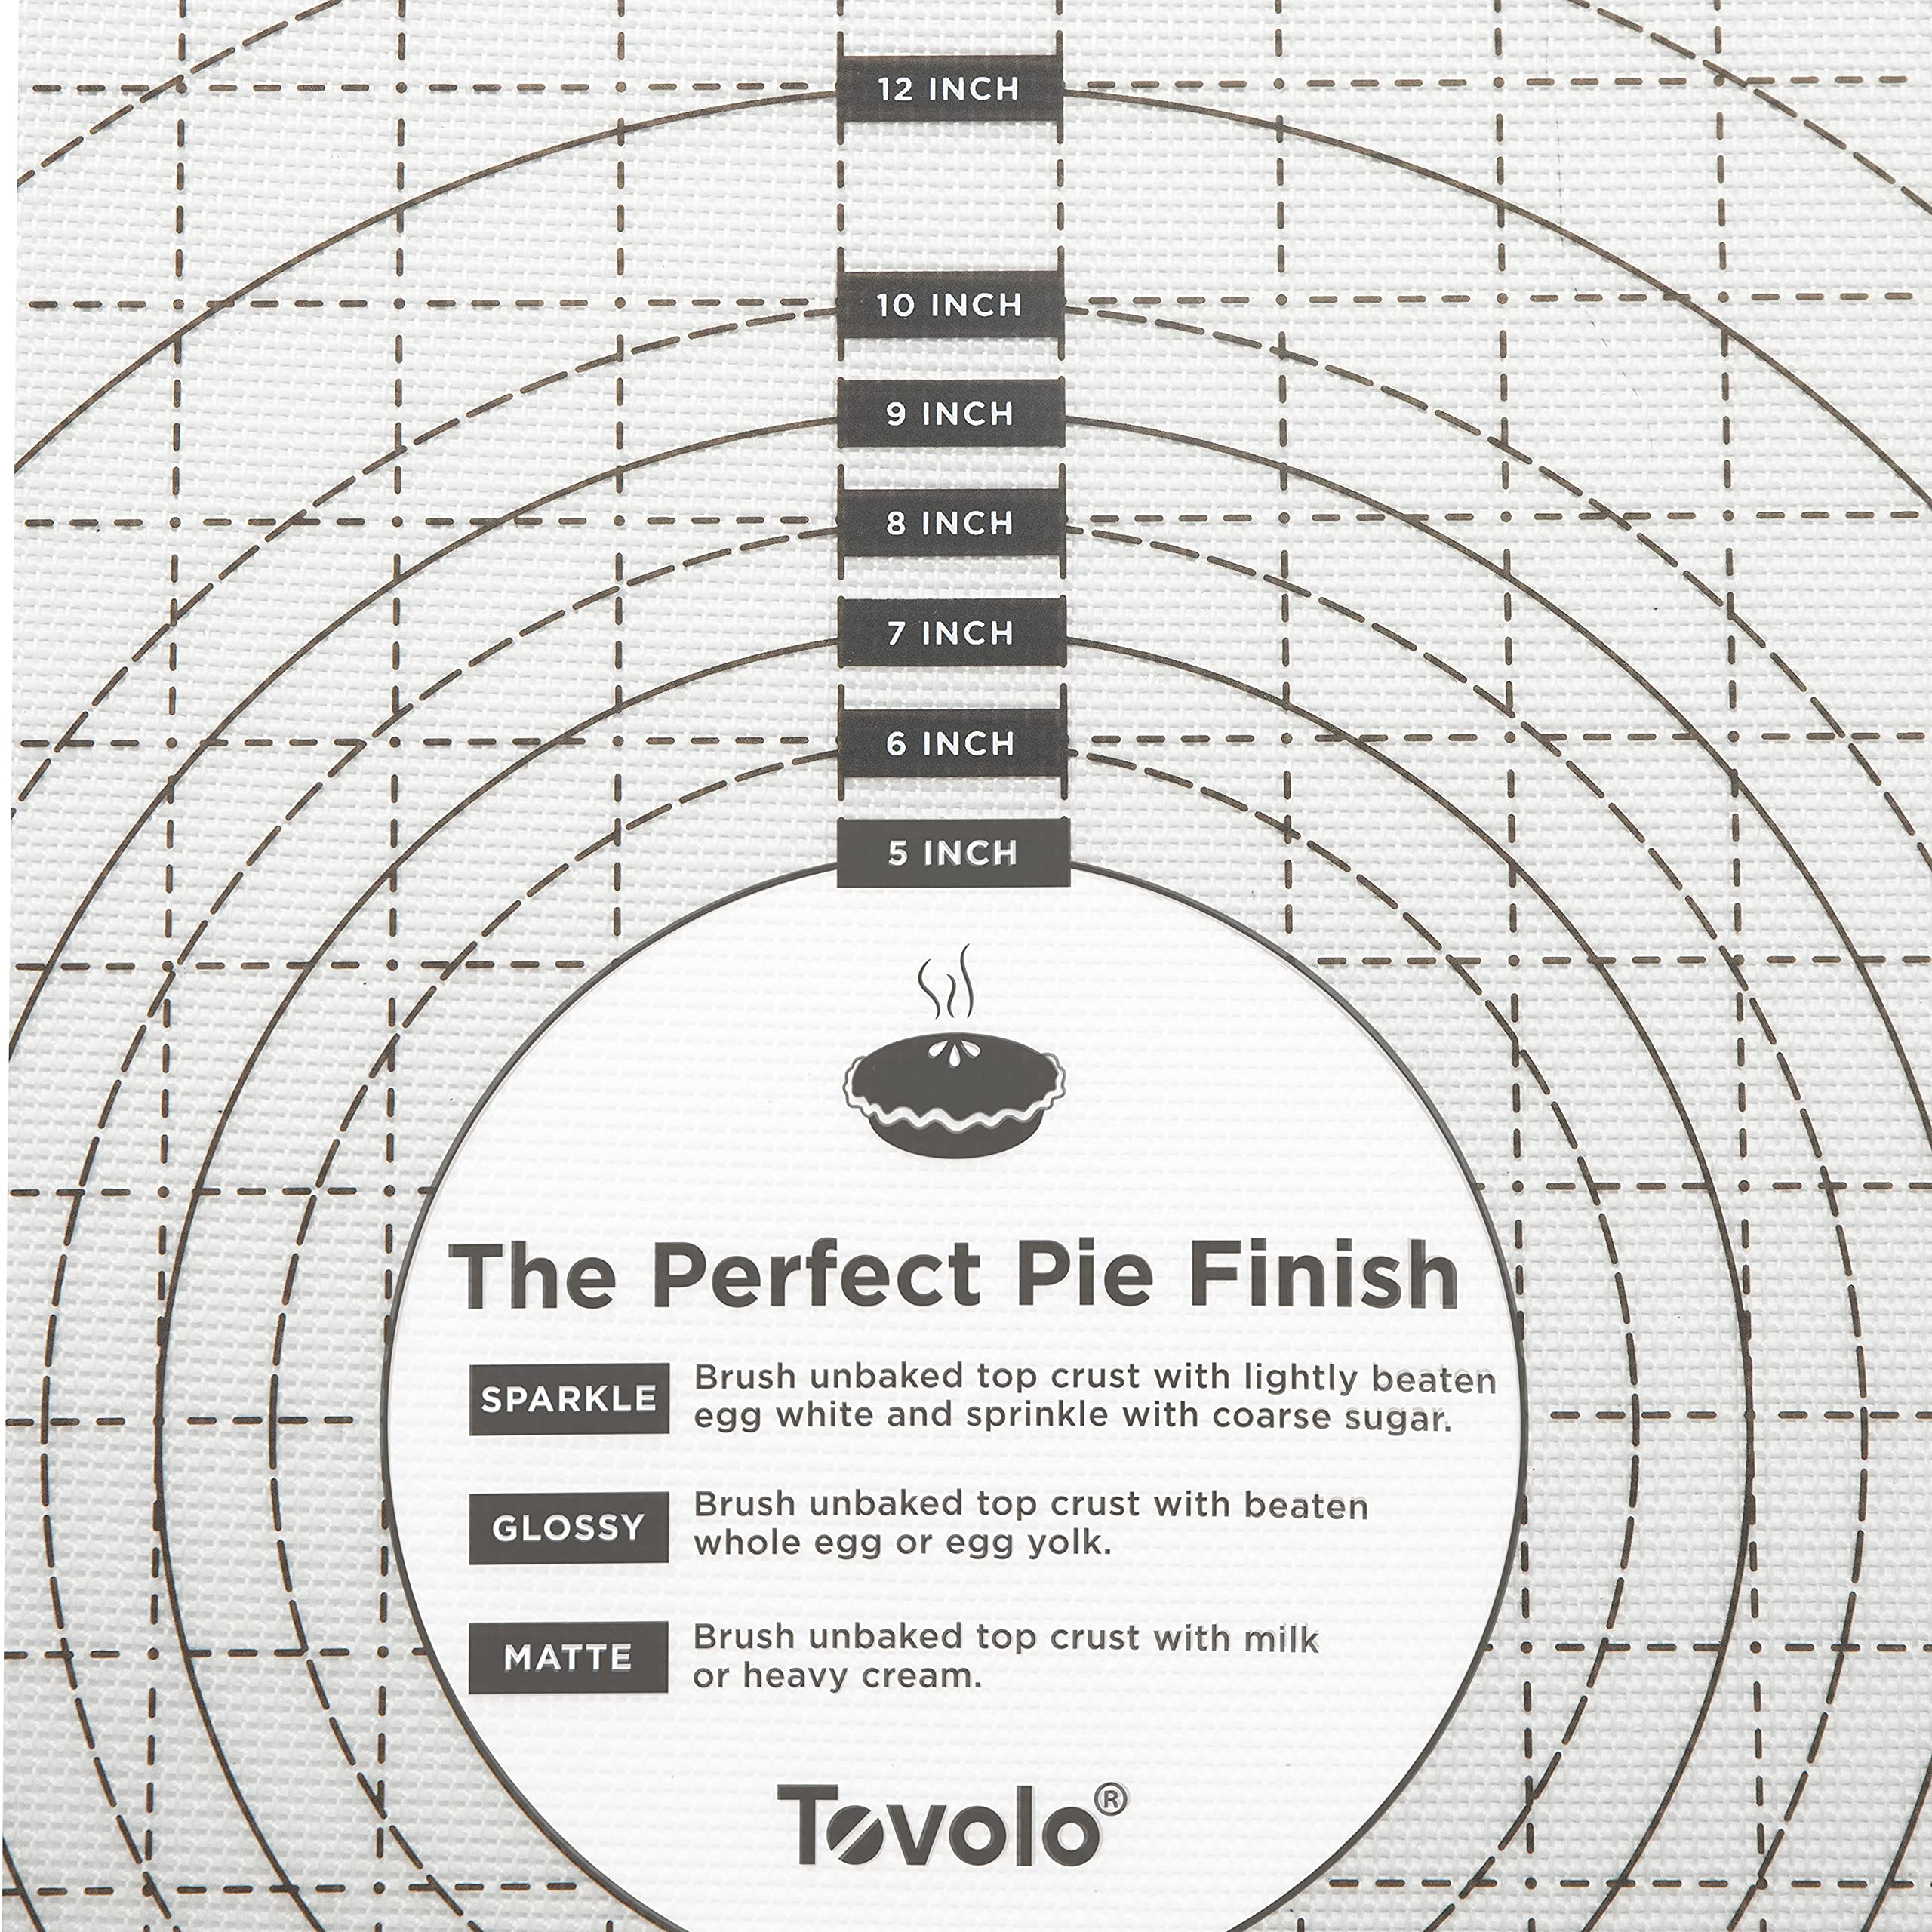 Tovolo Pro-Grade Sil Pastry Mat w/Reference Marks for Baking, Food and Meal Prep, Cooking and More